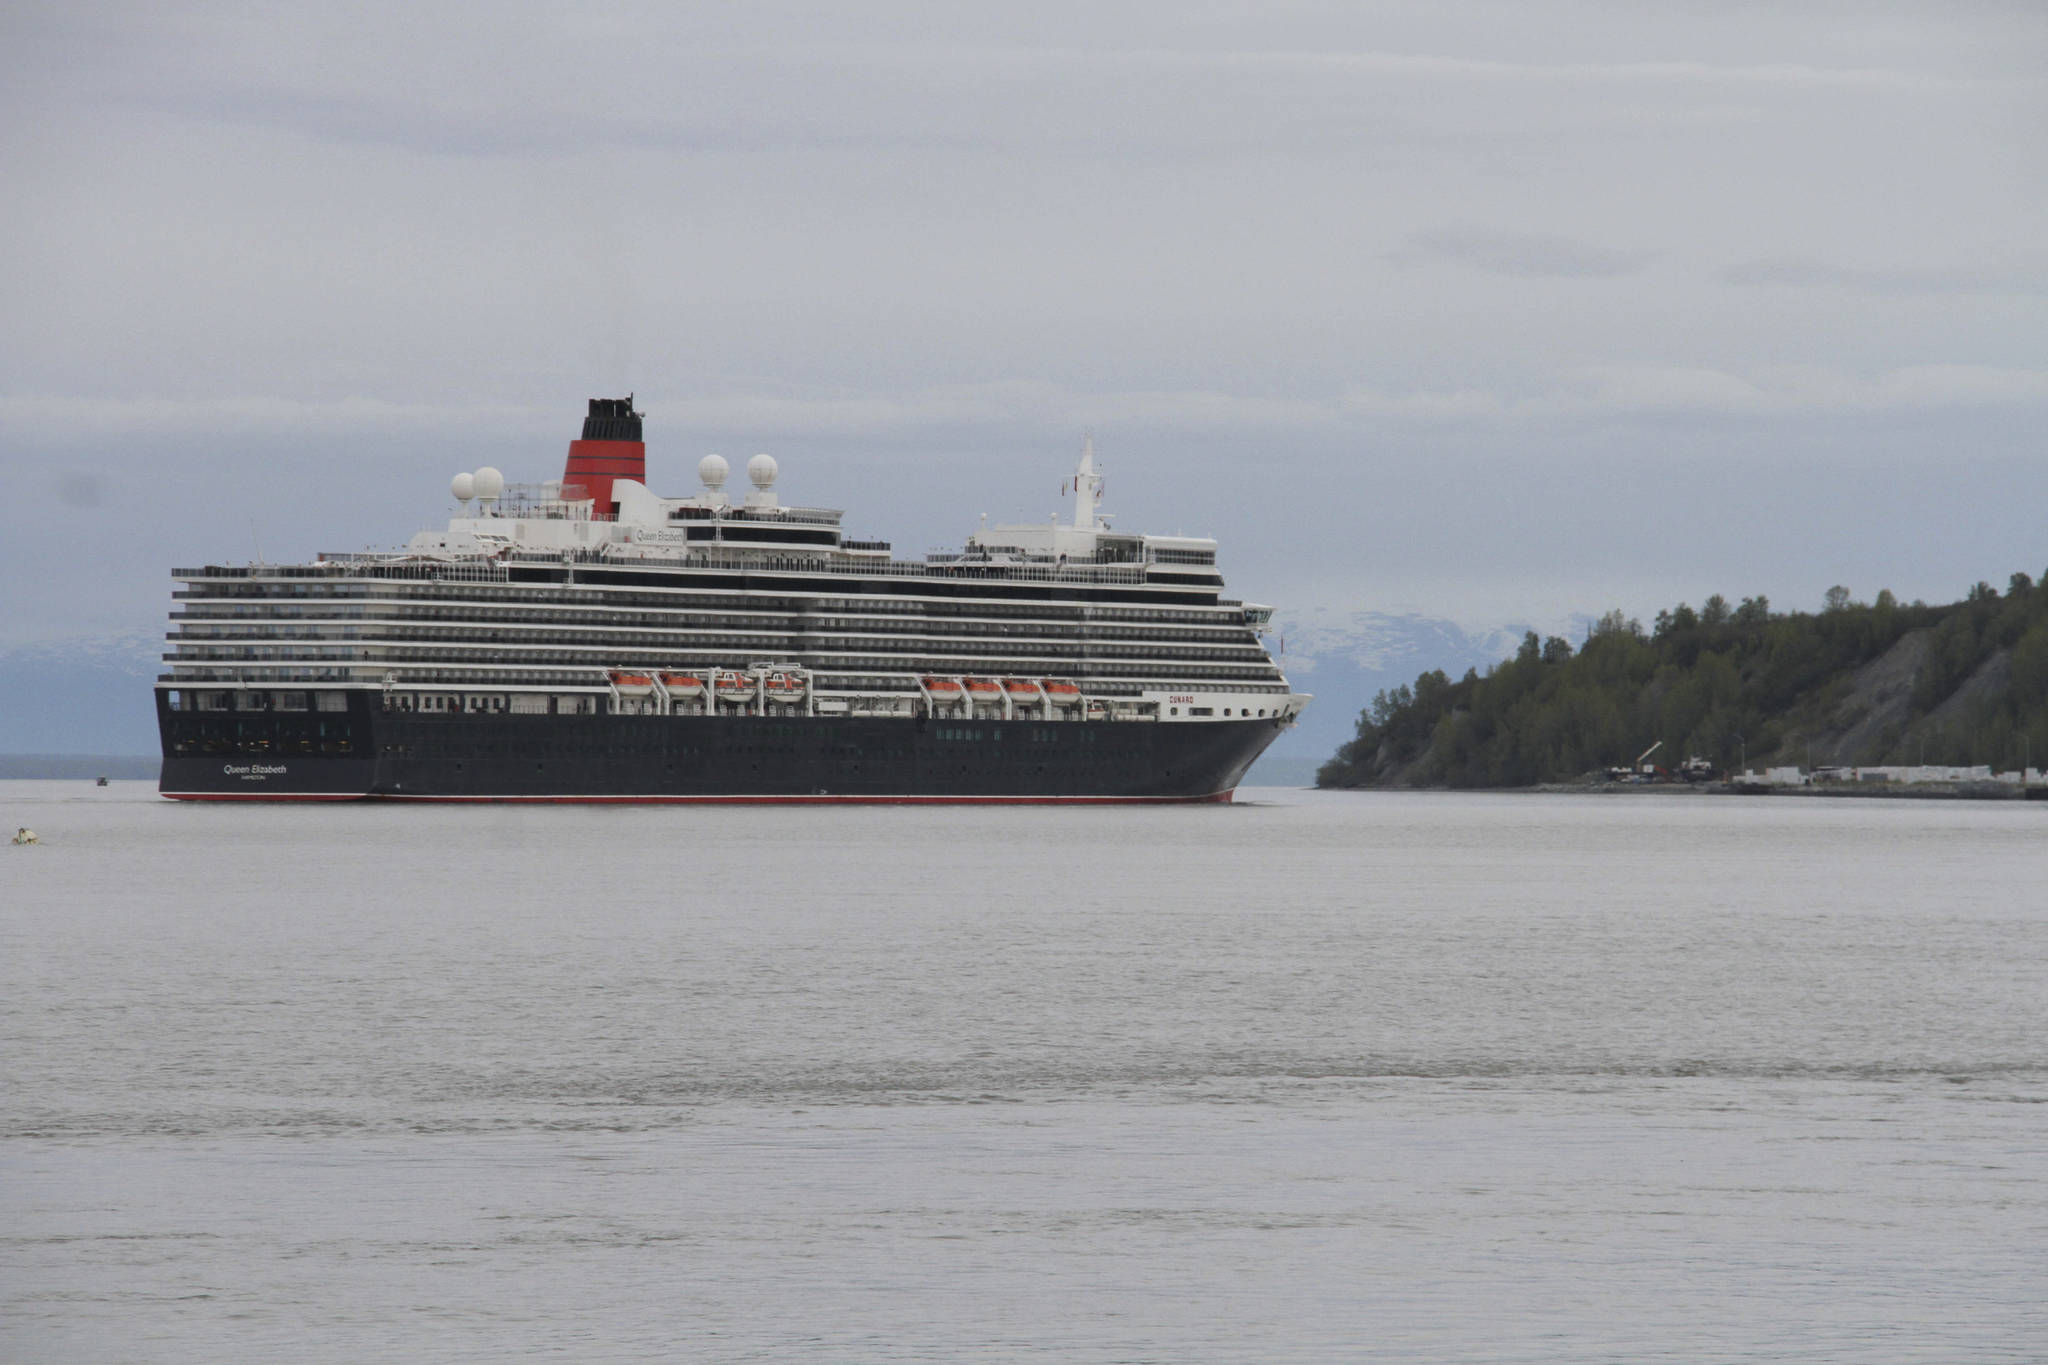 The Cunard cruise ship Queen Elizabeth sails through Cook Inlet Thursday, May 16, 2019, for a port call in Anchorage, Alaska. Federal officials say a lawsuit in Florida could block cruise ships from visiting Alaska in summer 2021. (AP Photo/Mark Thiessen, File)